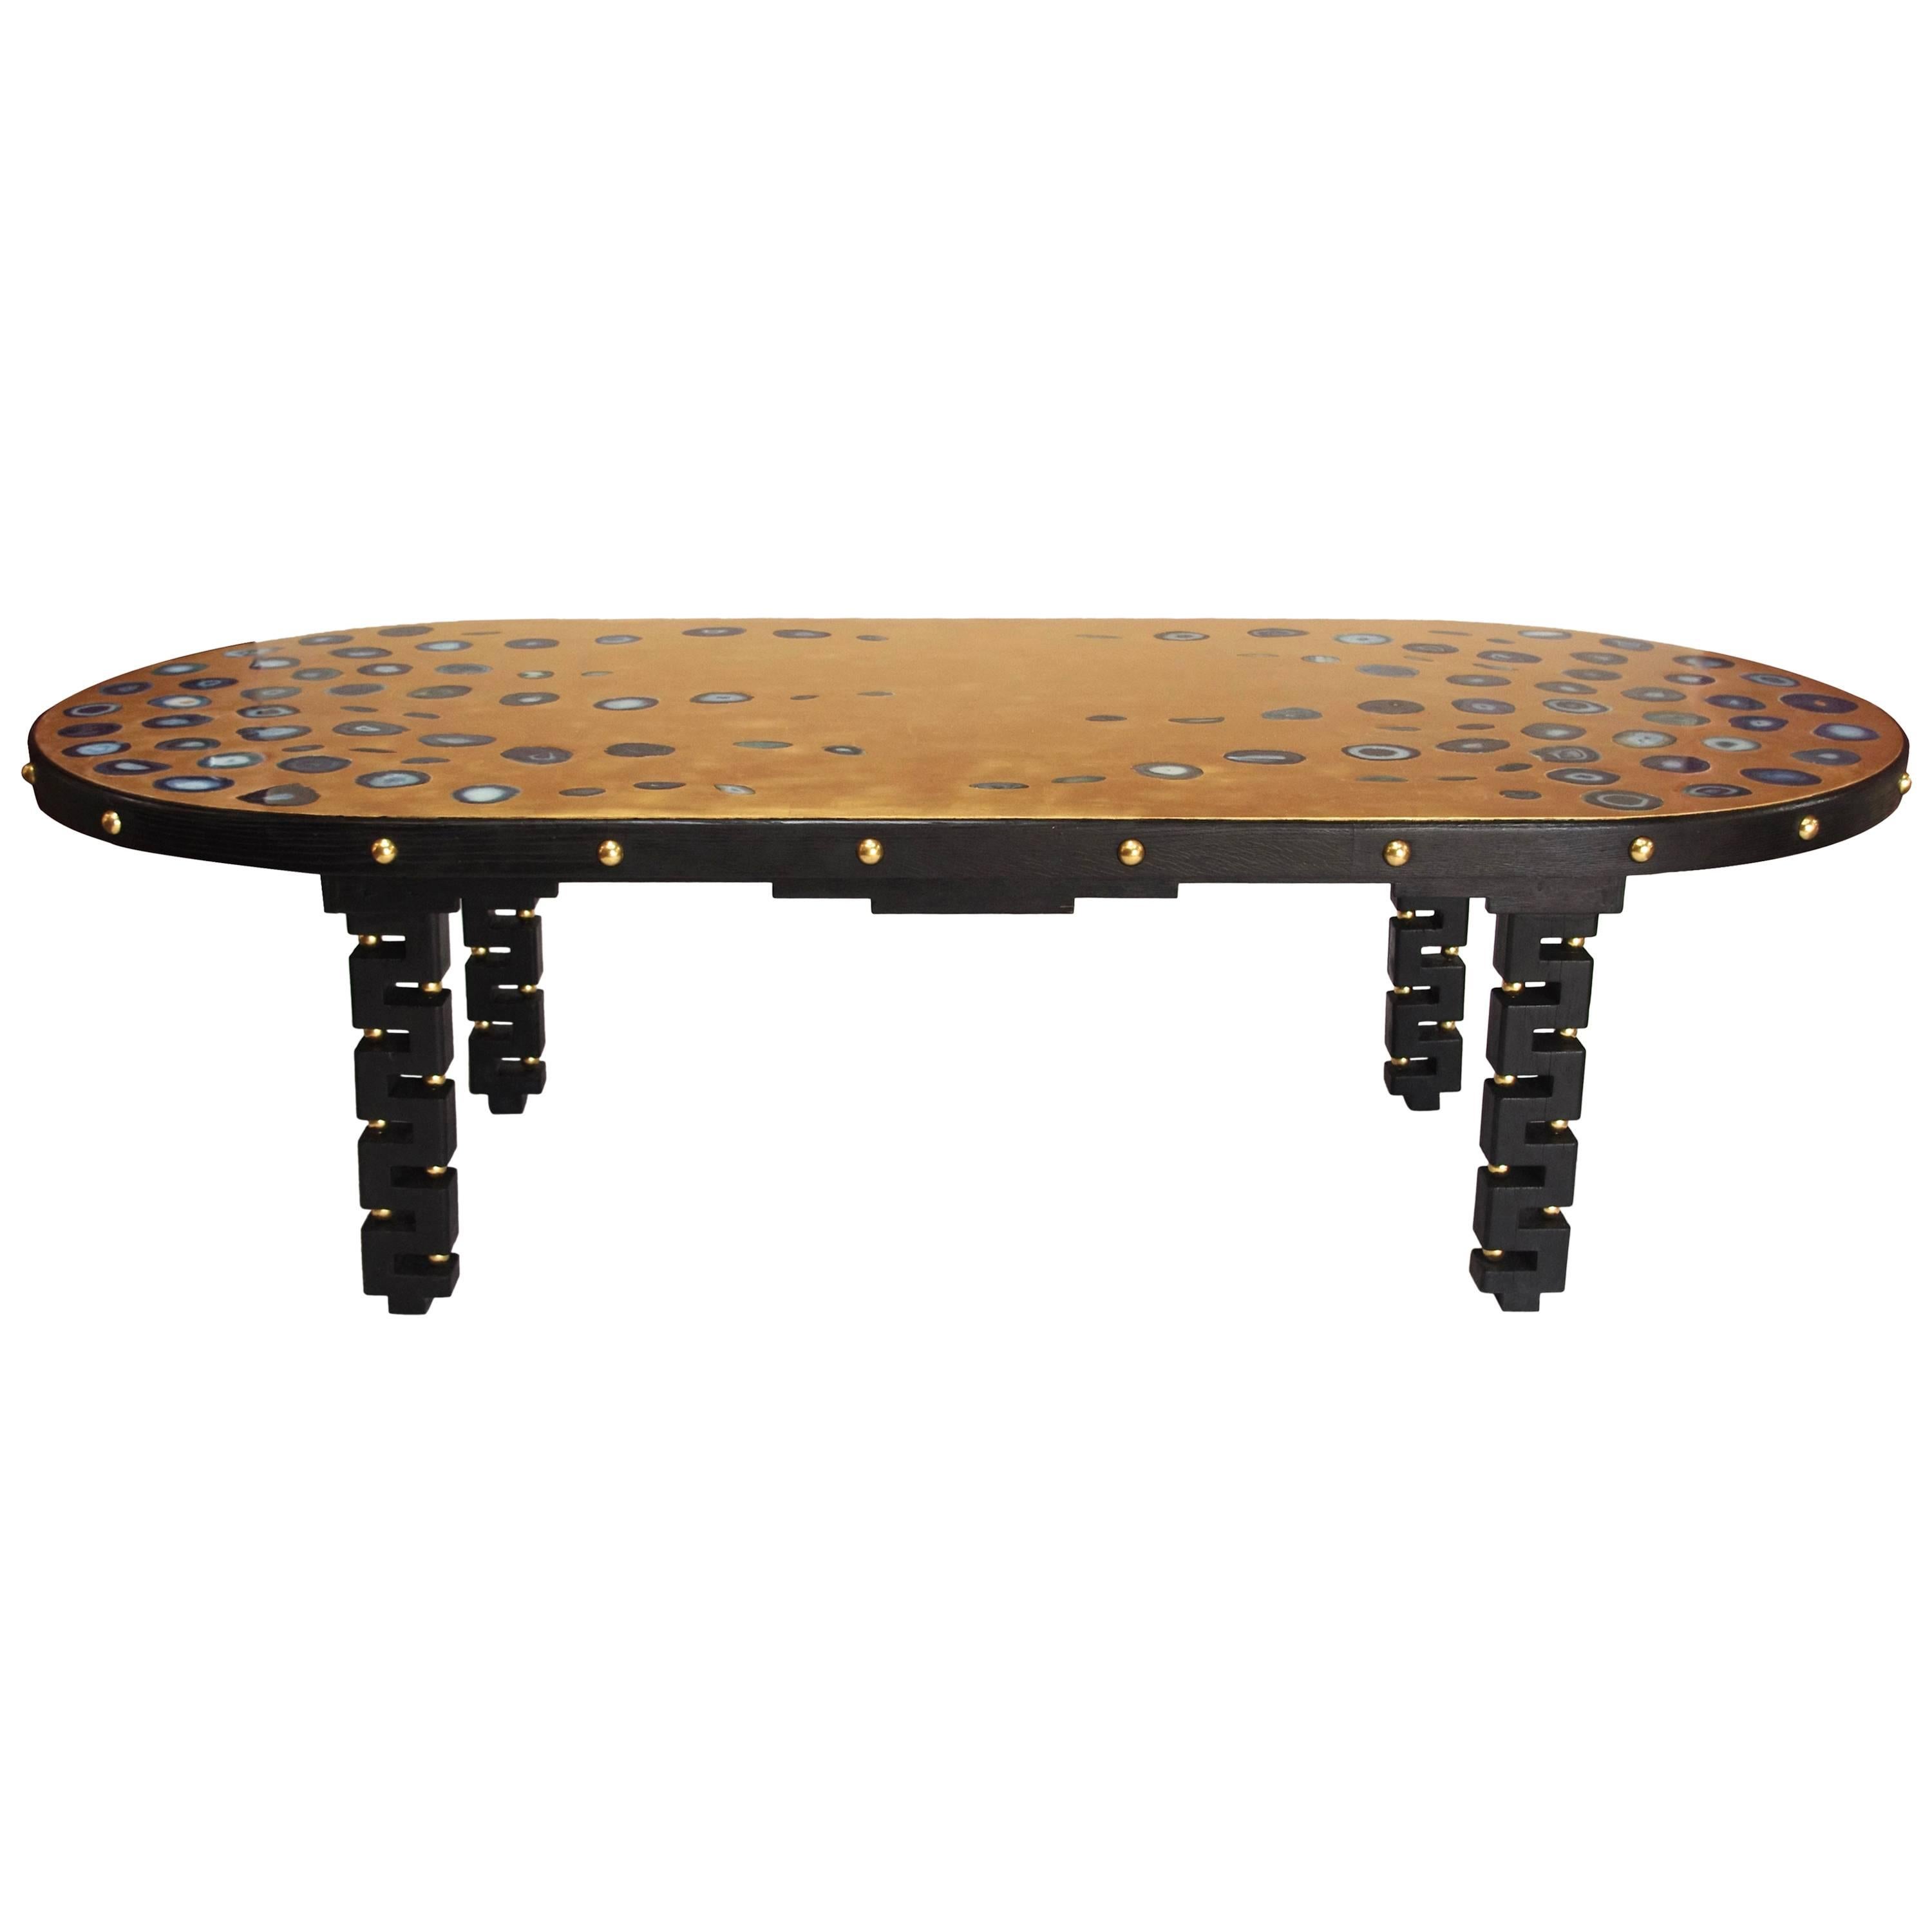 Large blackened oak table with gilt tray inlaid of agates, contemporary work For Sale